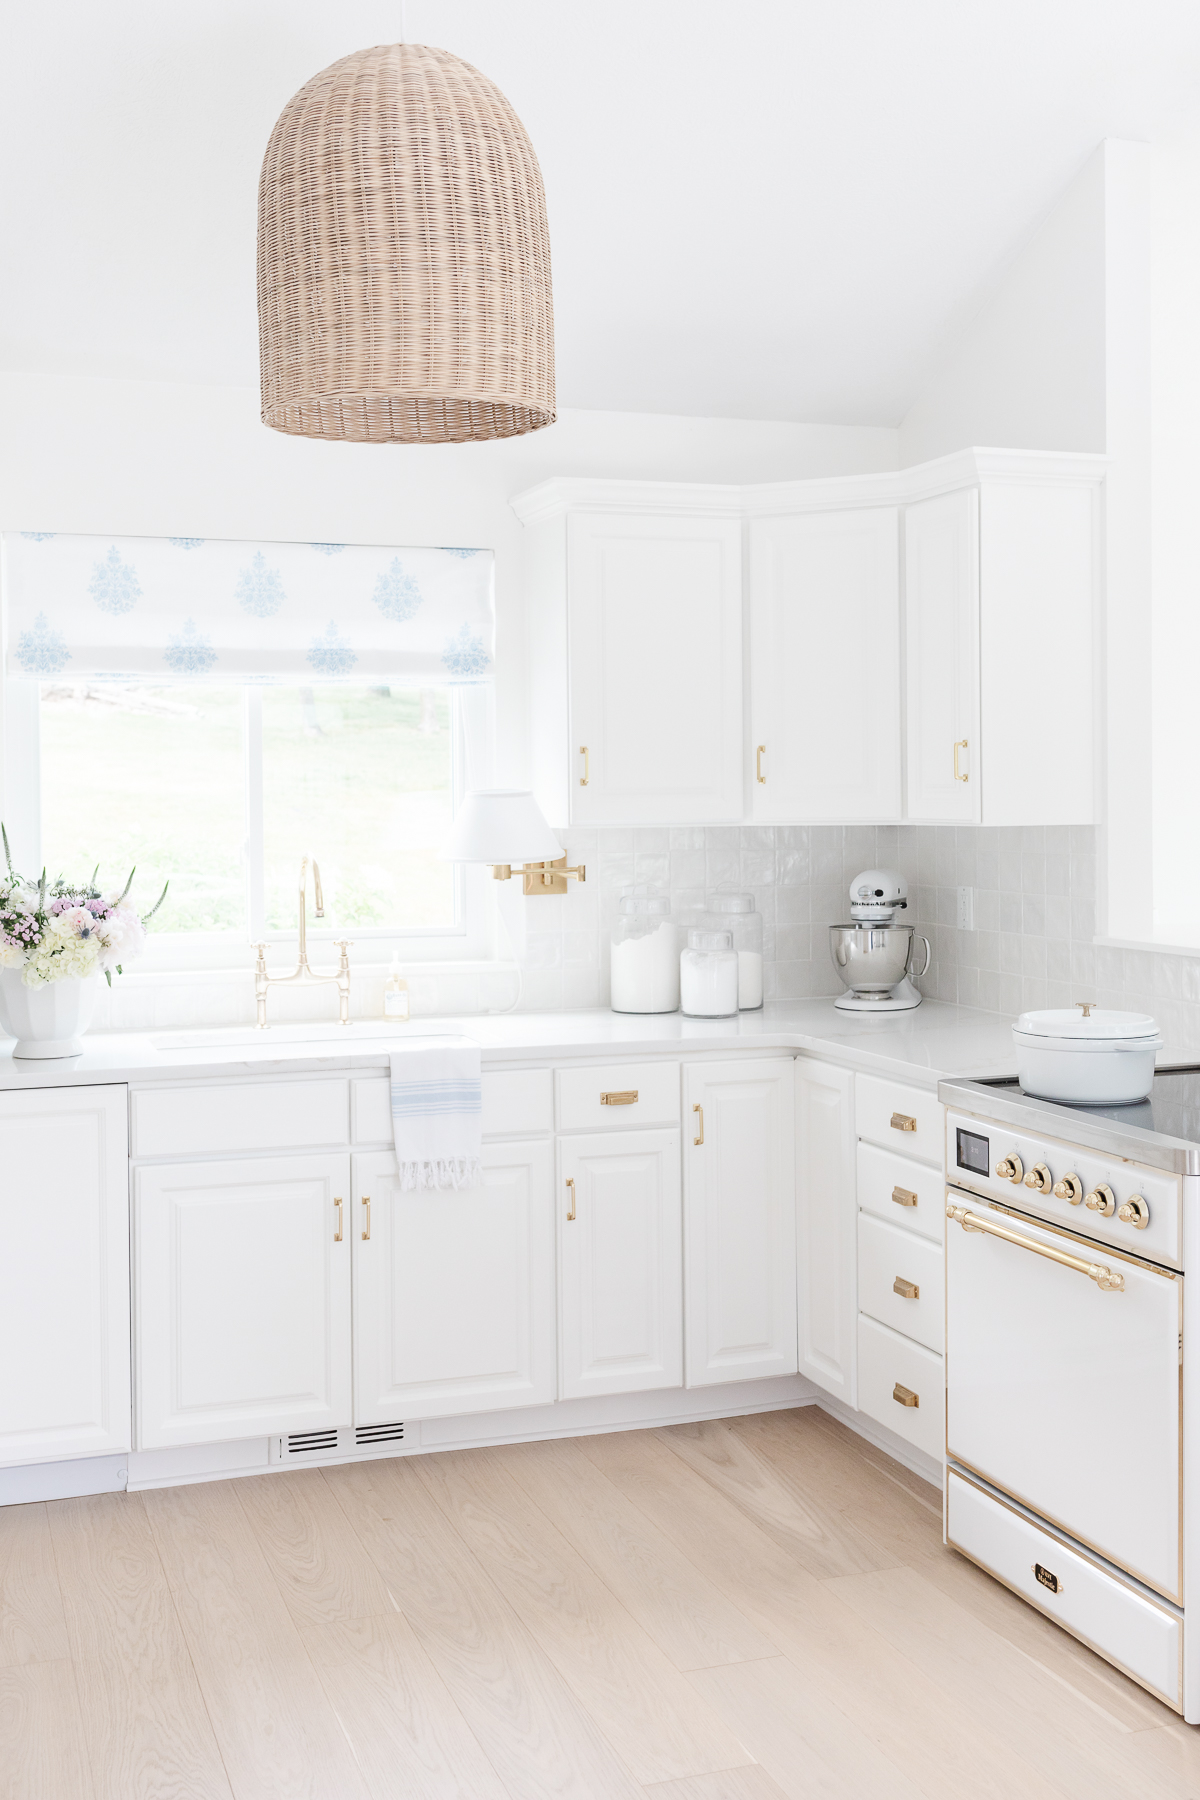 A bright, white kitchen with modern Ilve range appliances and a woven pendant lamp.